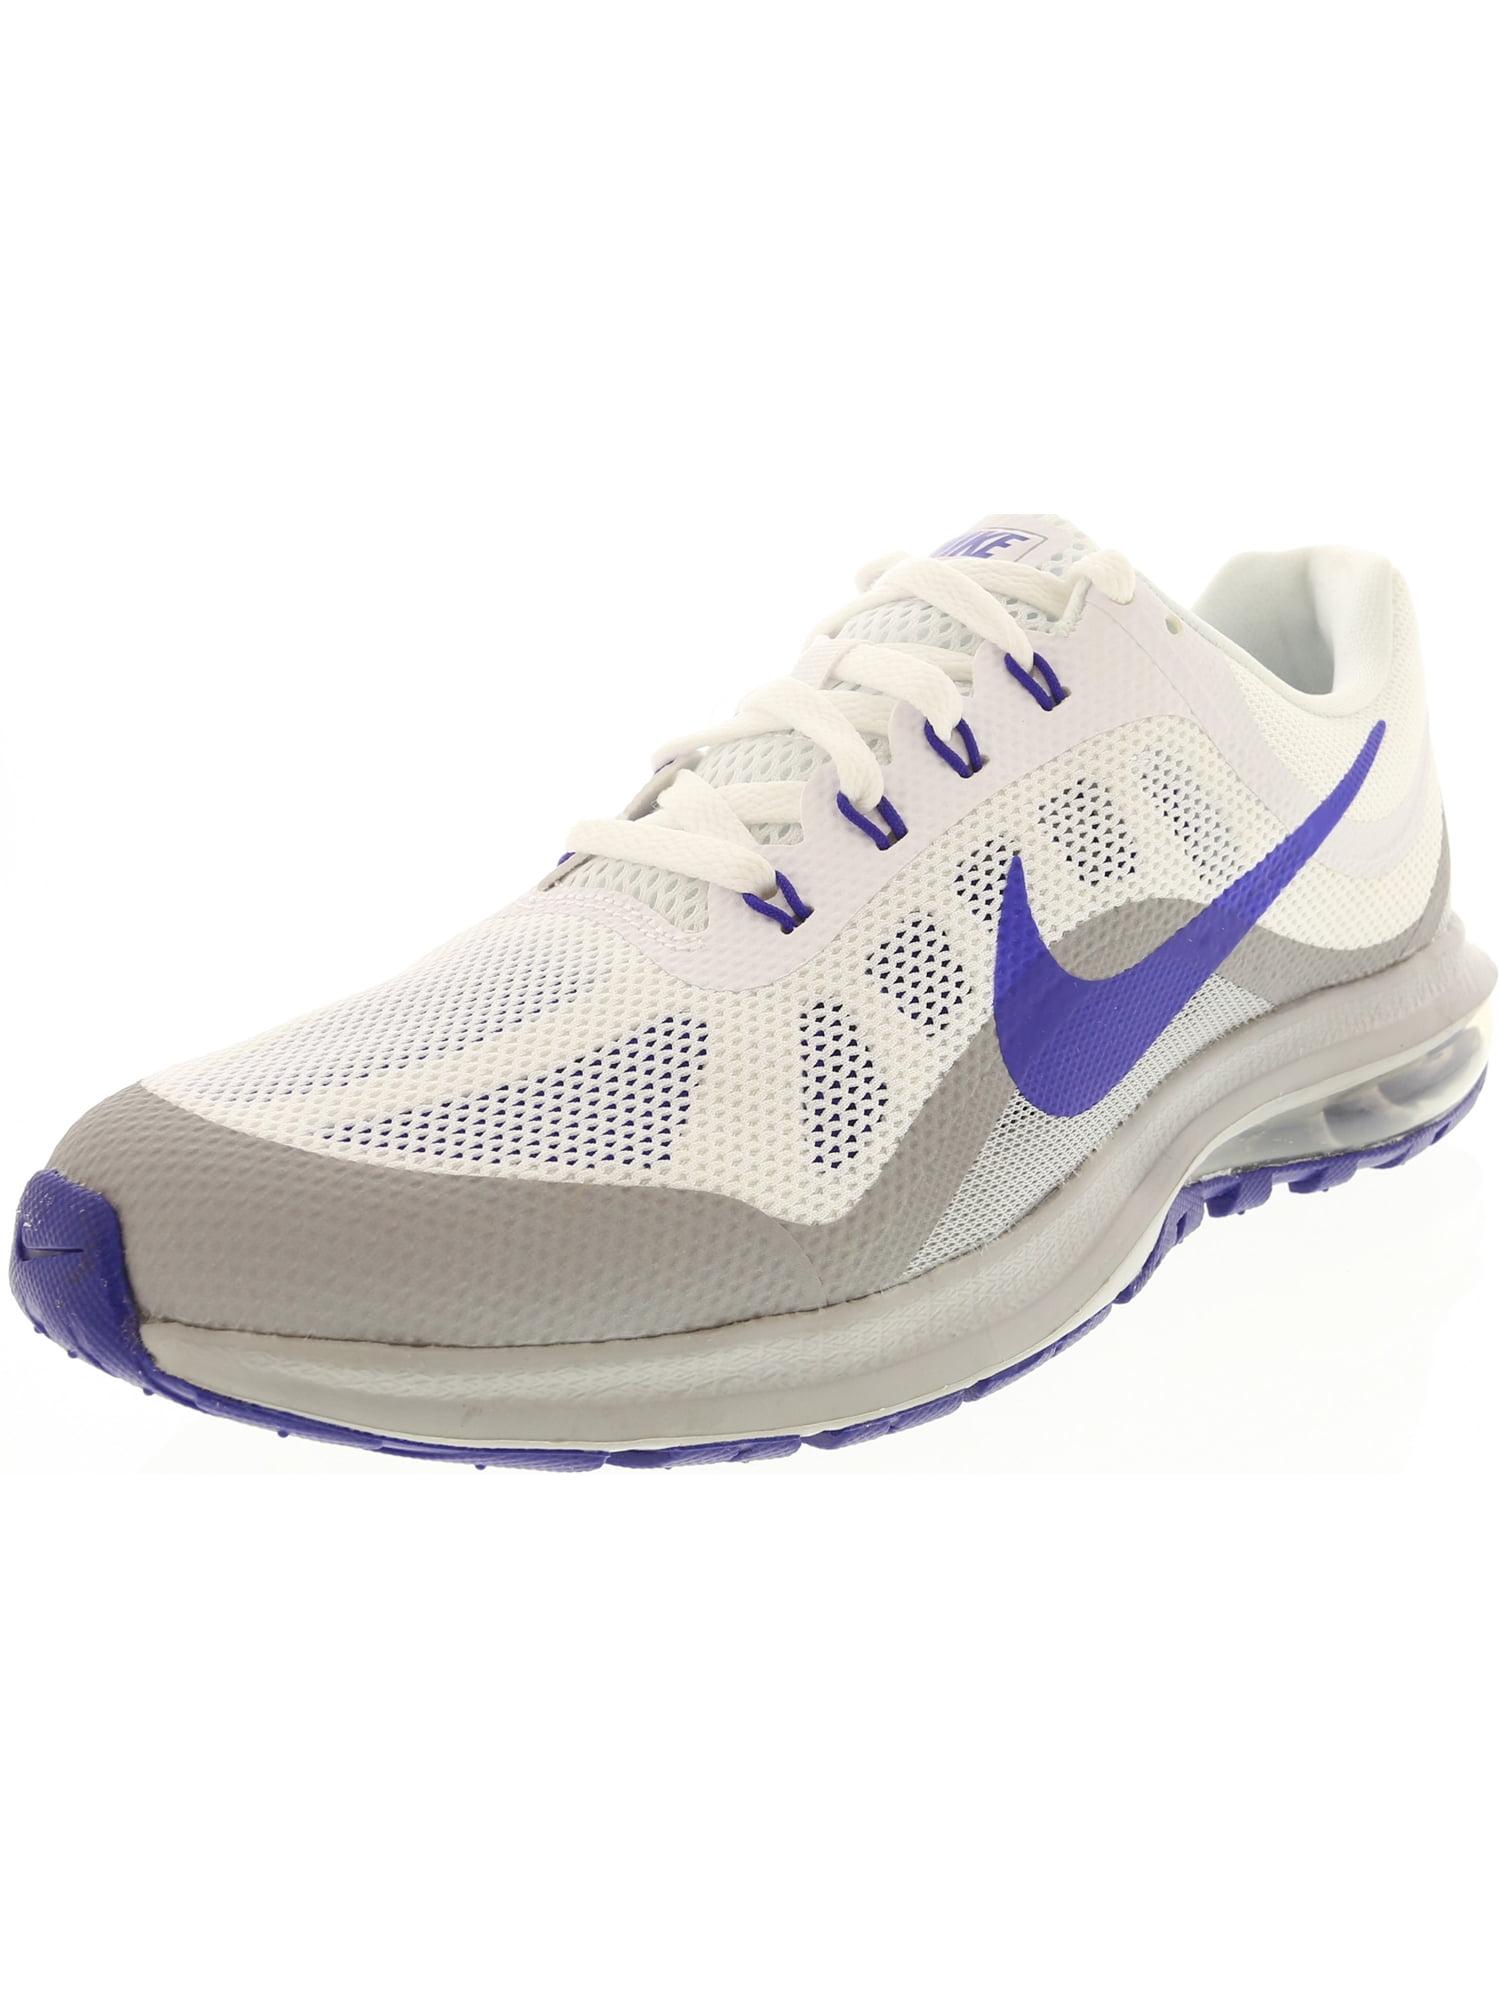 Nike Men's Air Max Dynasty 2 White / Paramount Blue - Wolf Grey Ankle-High  Running Shoe 10M - Walmart.com